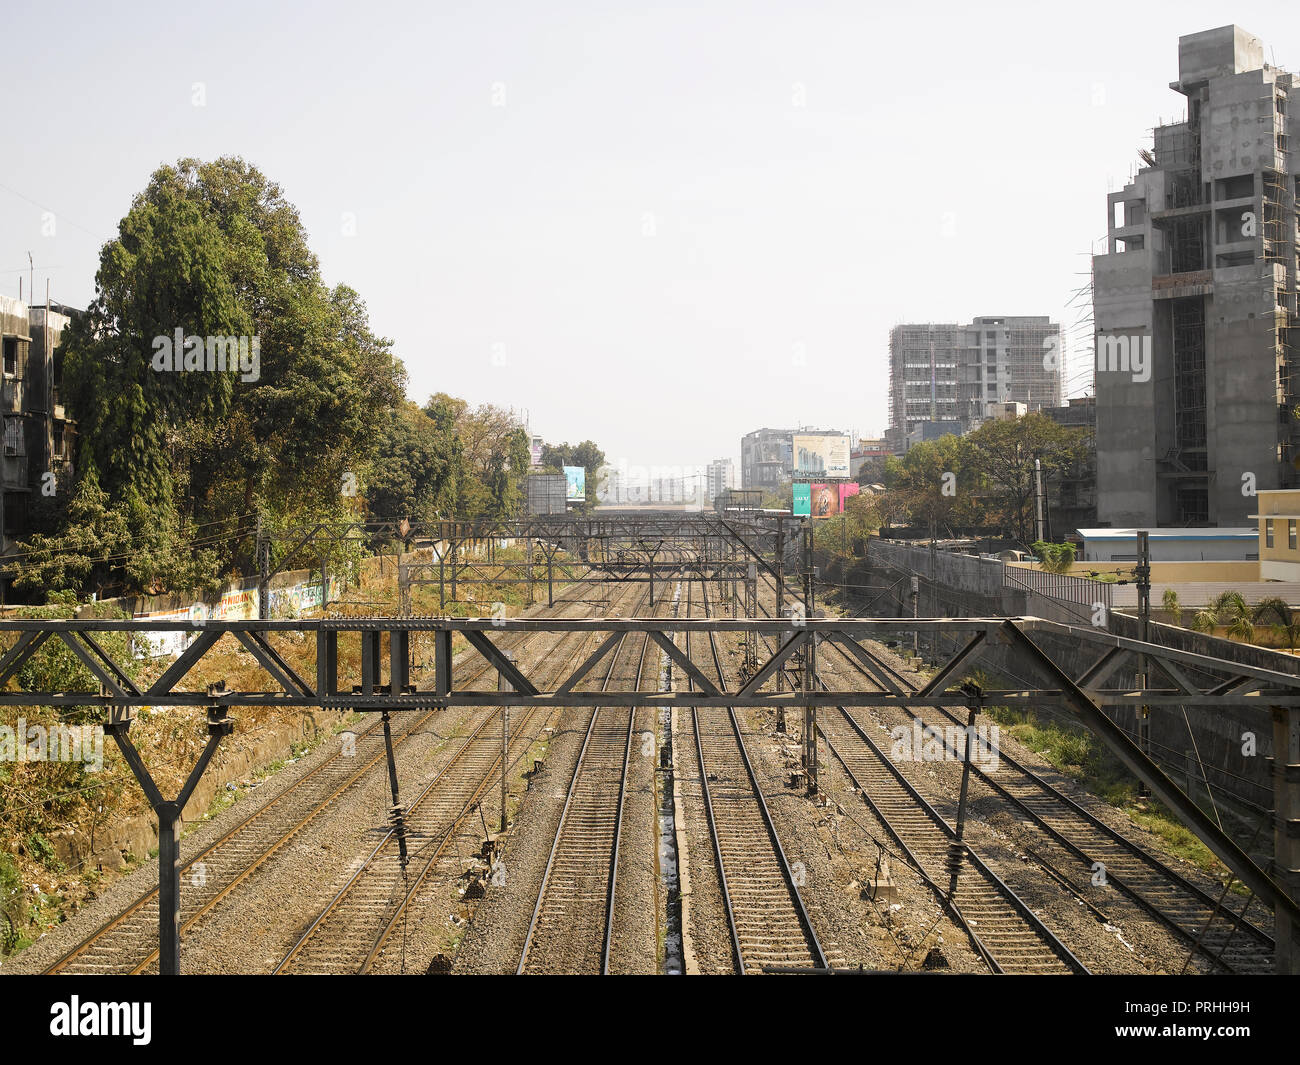 VIEW OF RAILWAY TRACKS AND LOCAL TRAINS IN MUMBAI, INDIA, ASIA Stock Photo